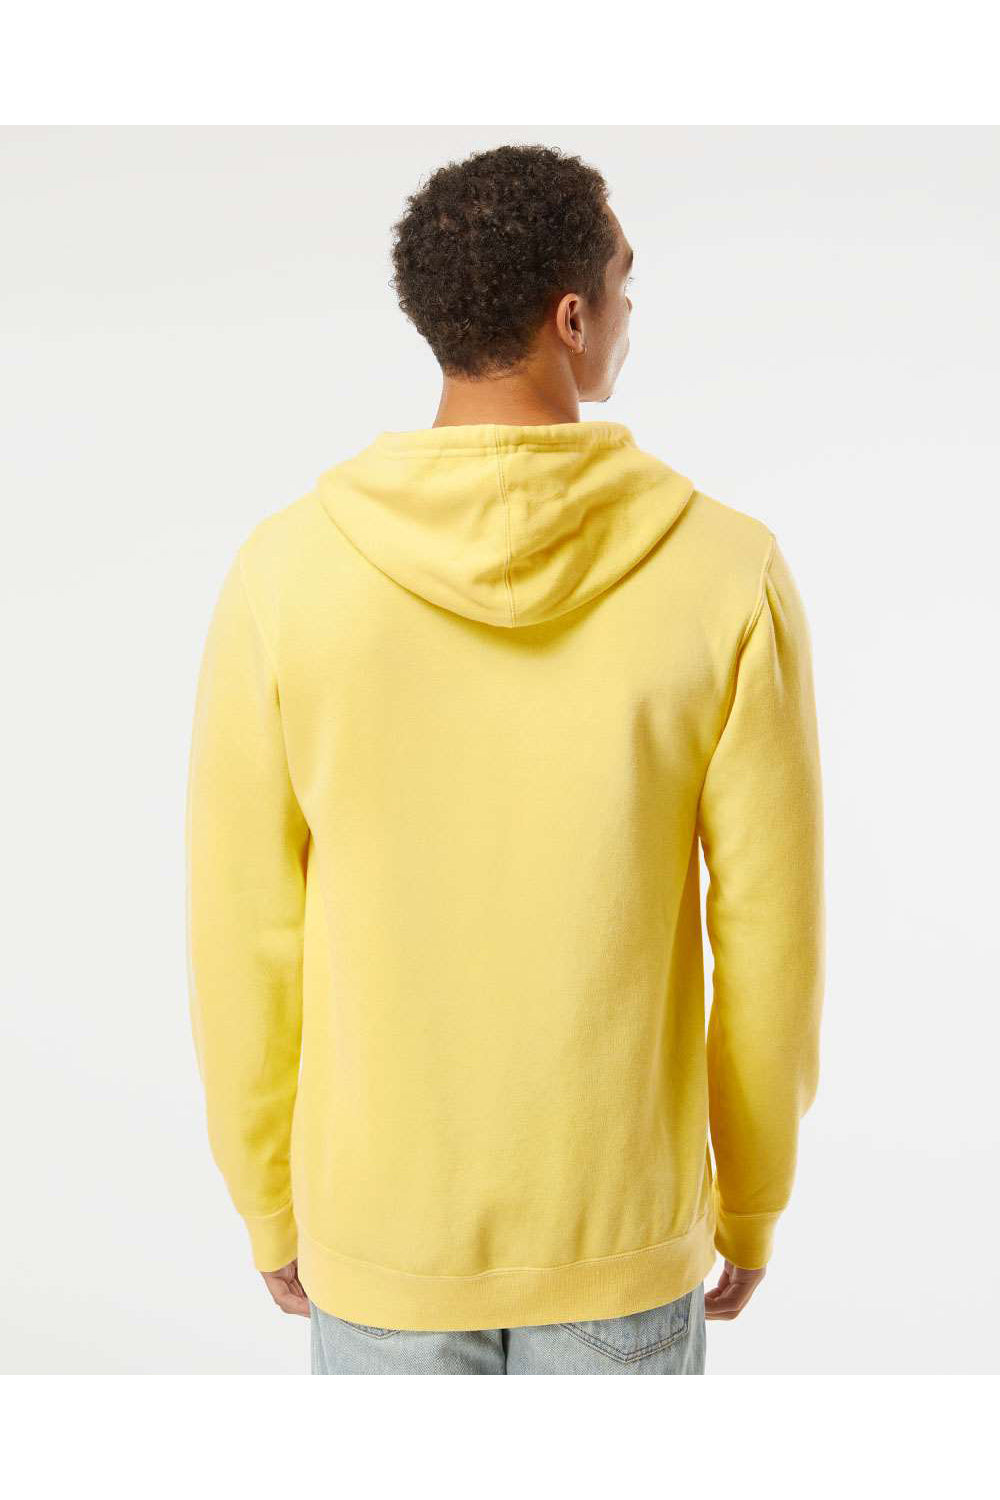 Independent Trading Co. PRM4500 Mens Pigment Dyed Hooded Sweatshirt Hoodie Yellow Model Back